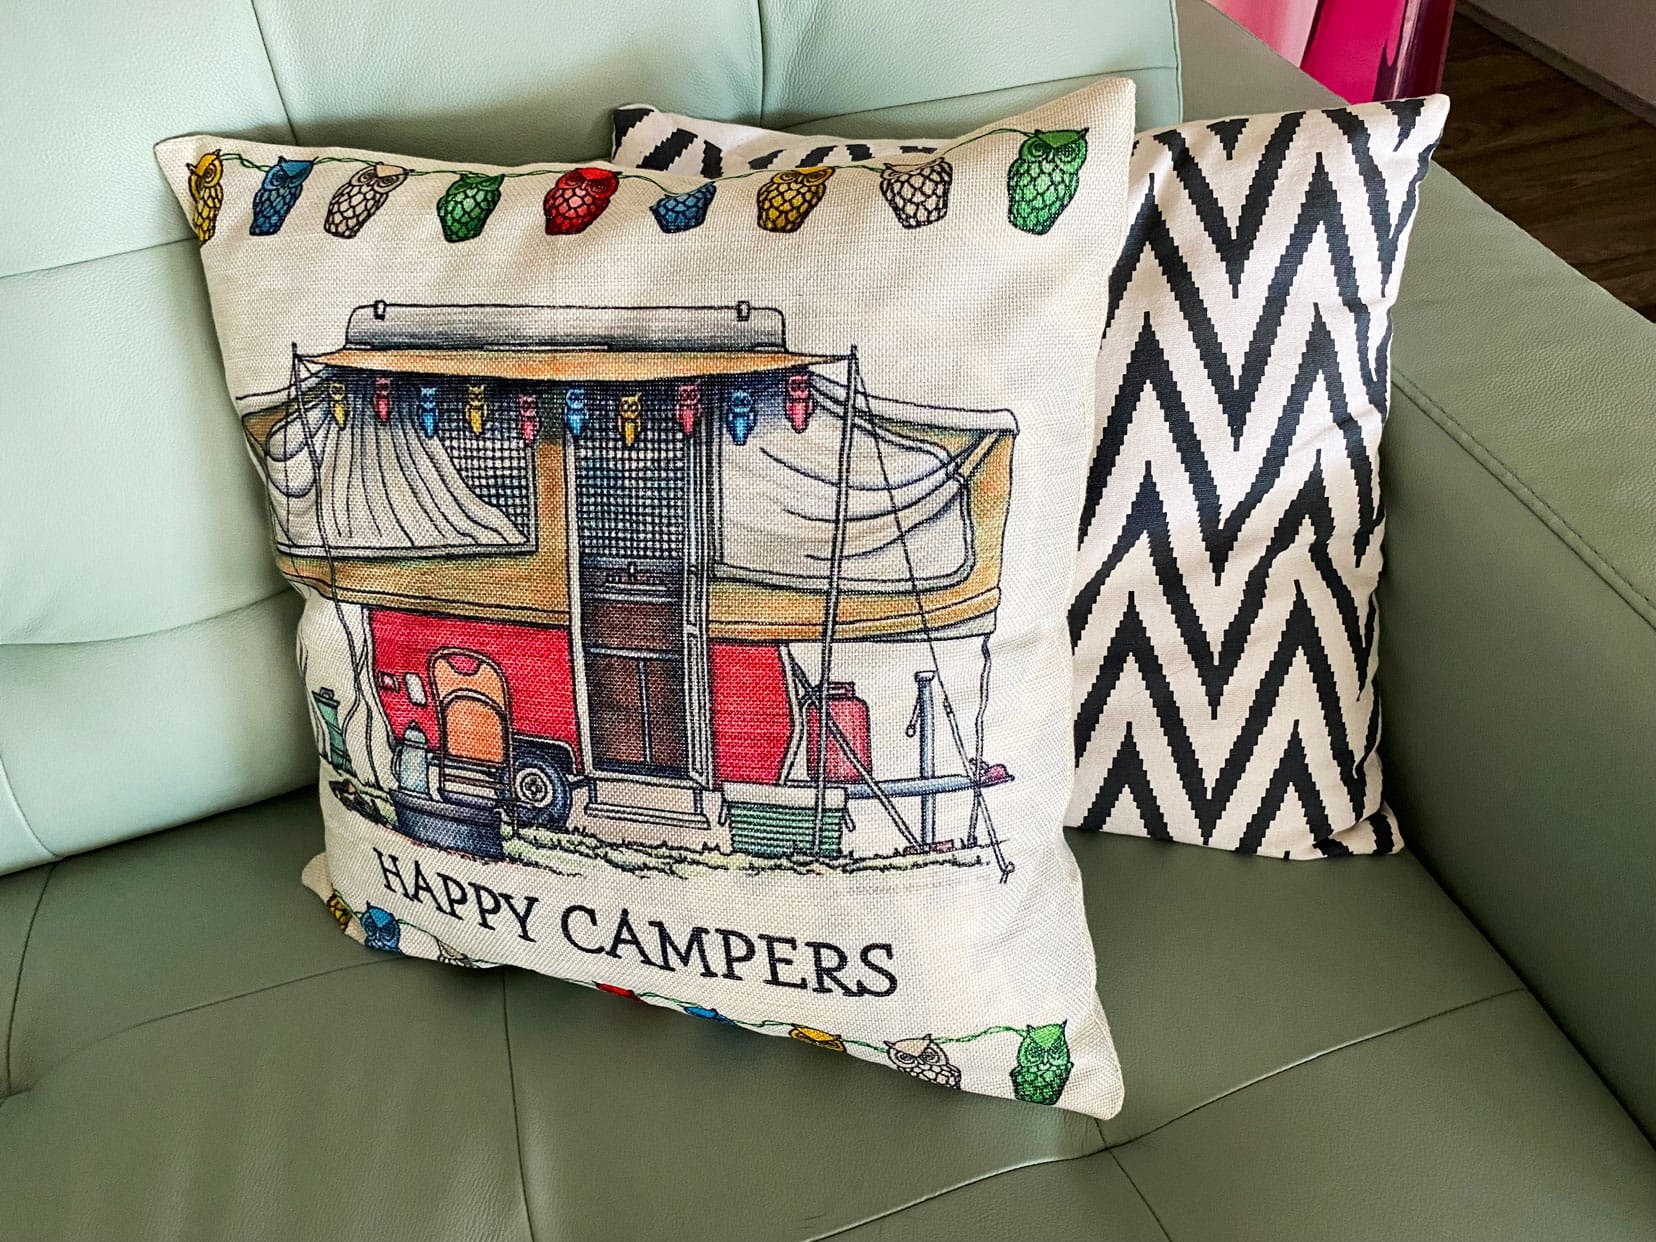 Happy campers cushion 